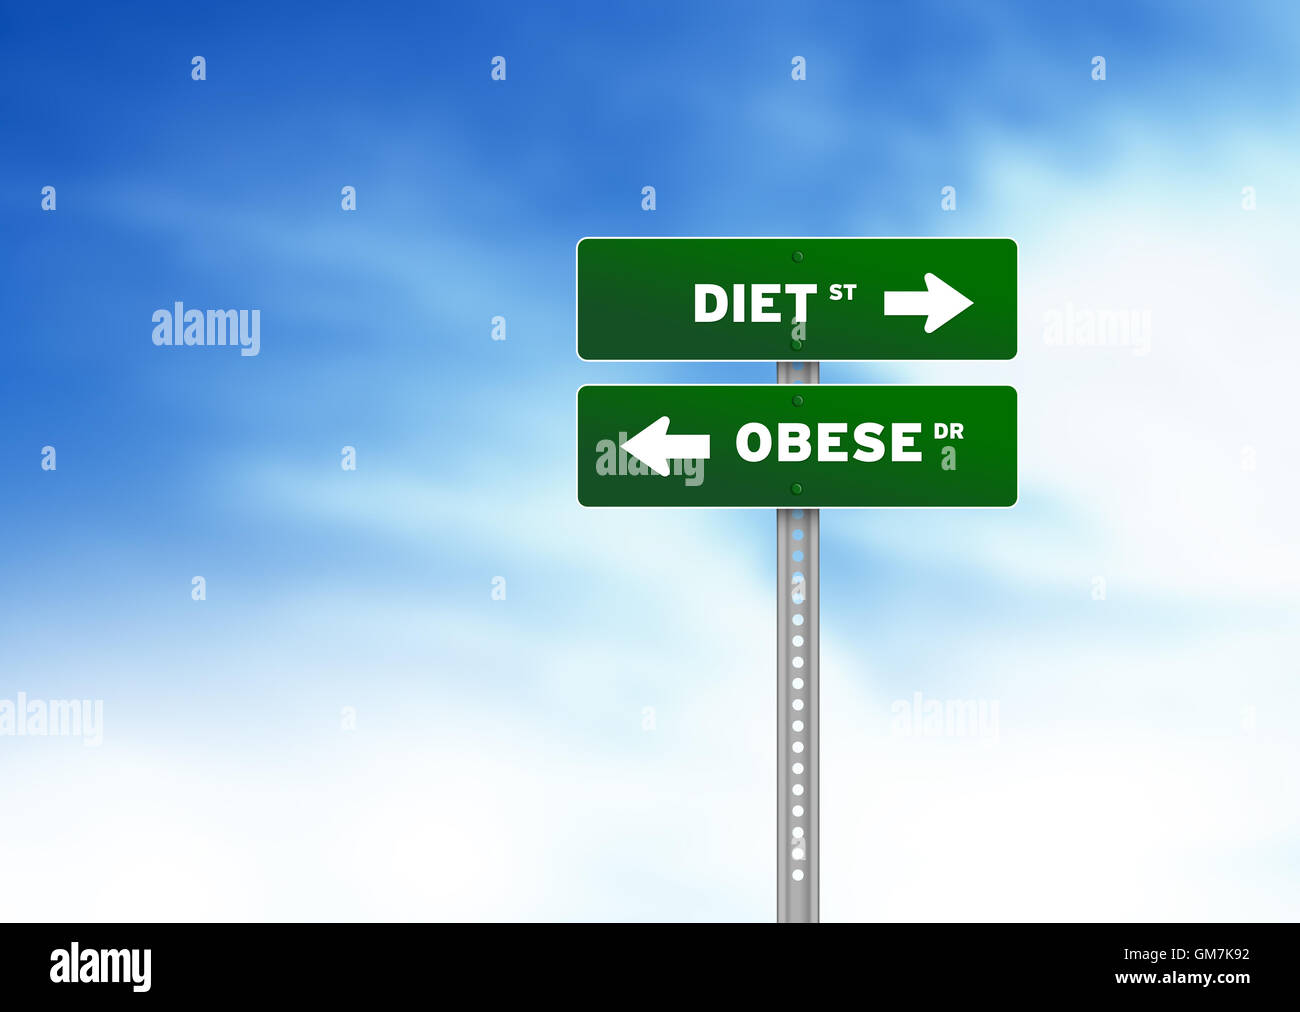 Diet and Obese Road Sign Stock Photo